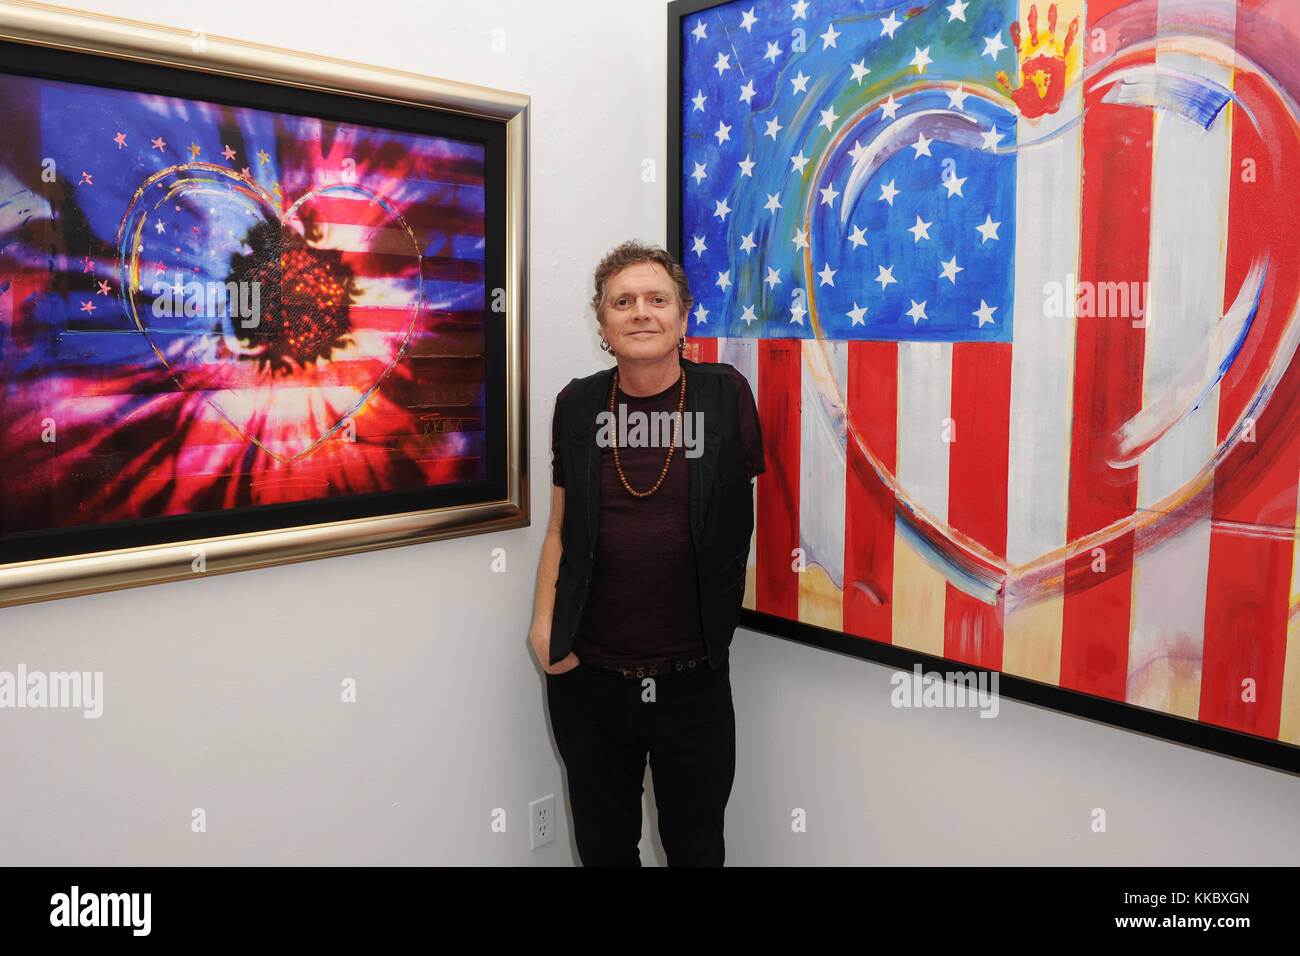 FORT LAUDERDALE, FL - JANUARY 16: Rick Allen of Def Leppard showcases his artwork at Wentworth Gallery on January 16, 2016 in Fort Lauderdale, Florida  People:  Rick Allen Stock Photo